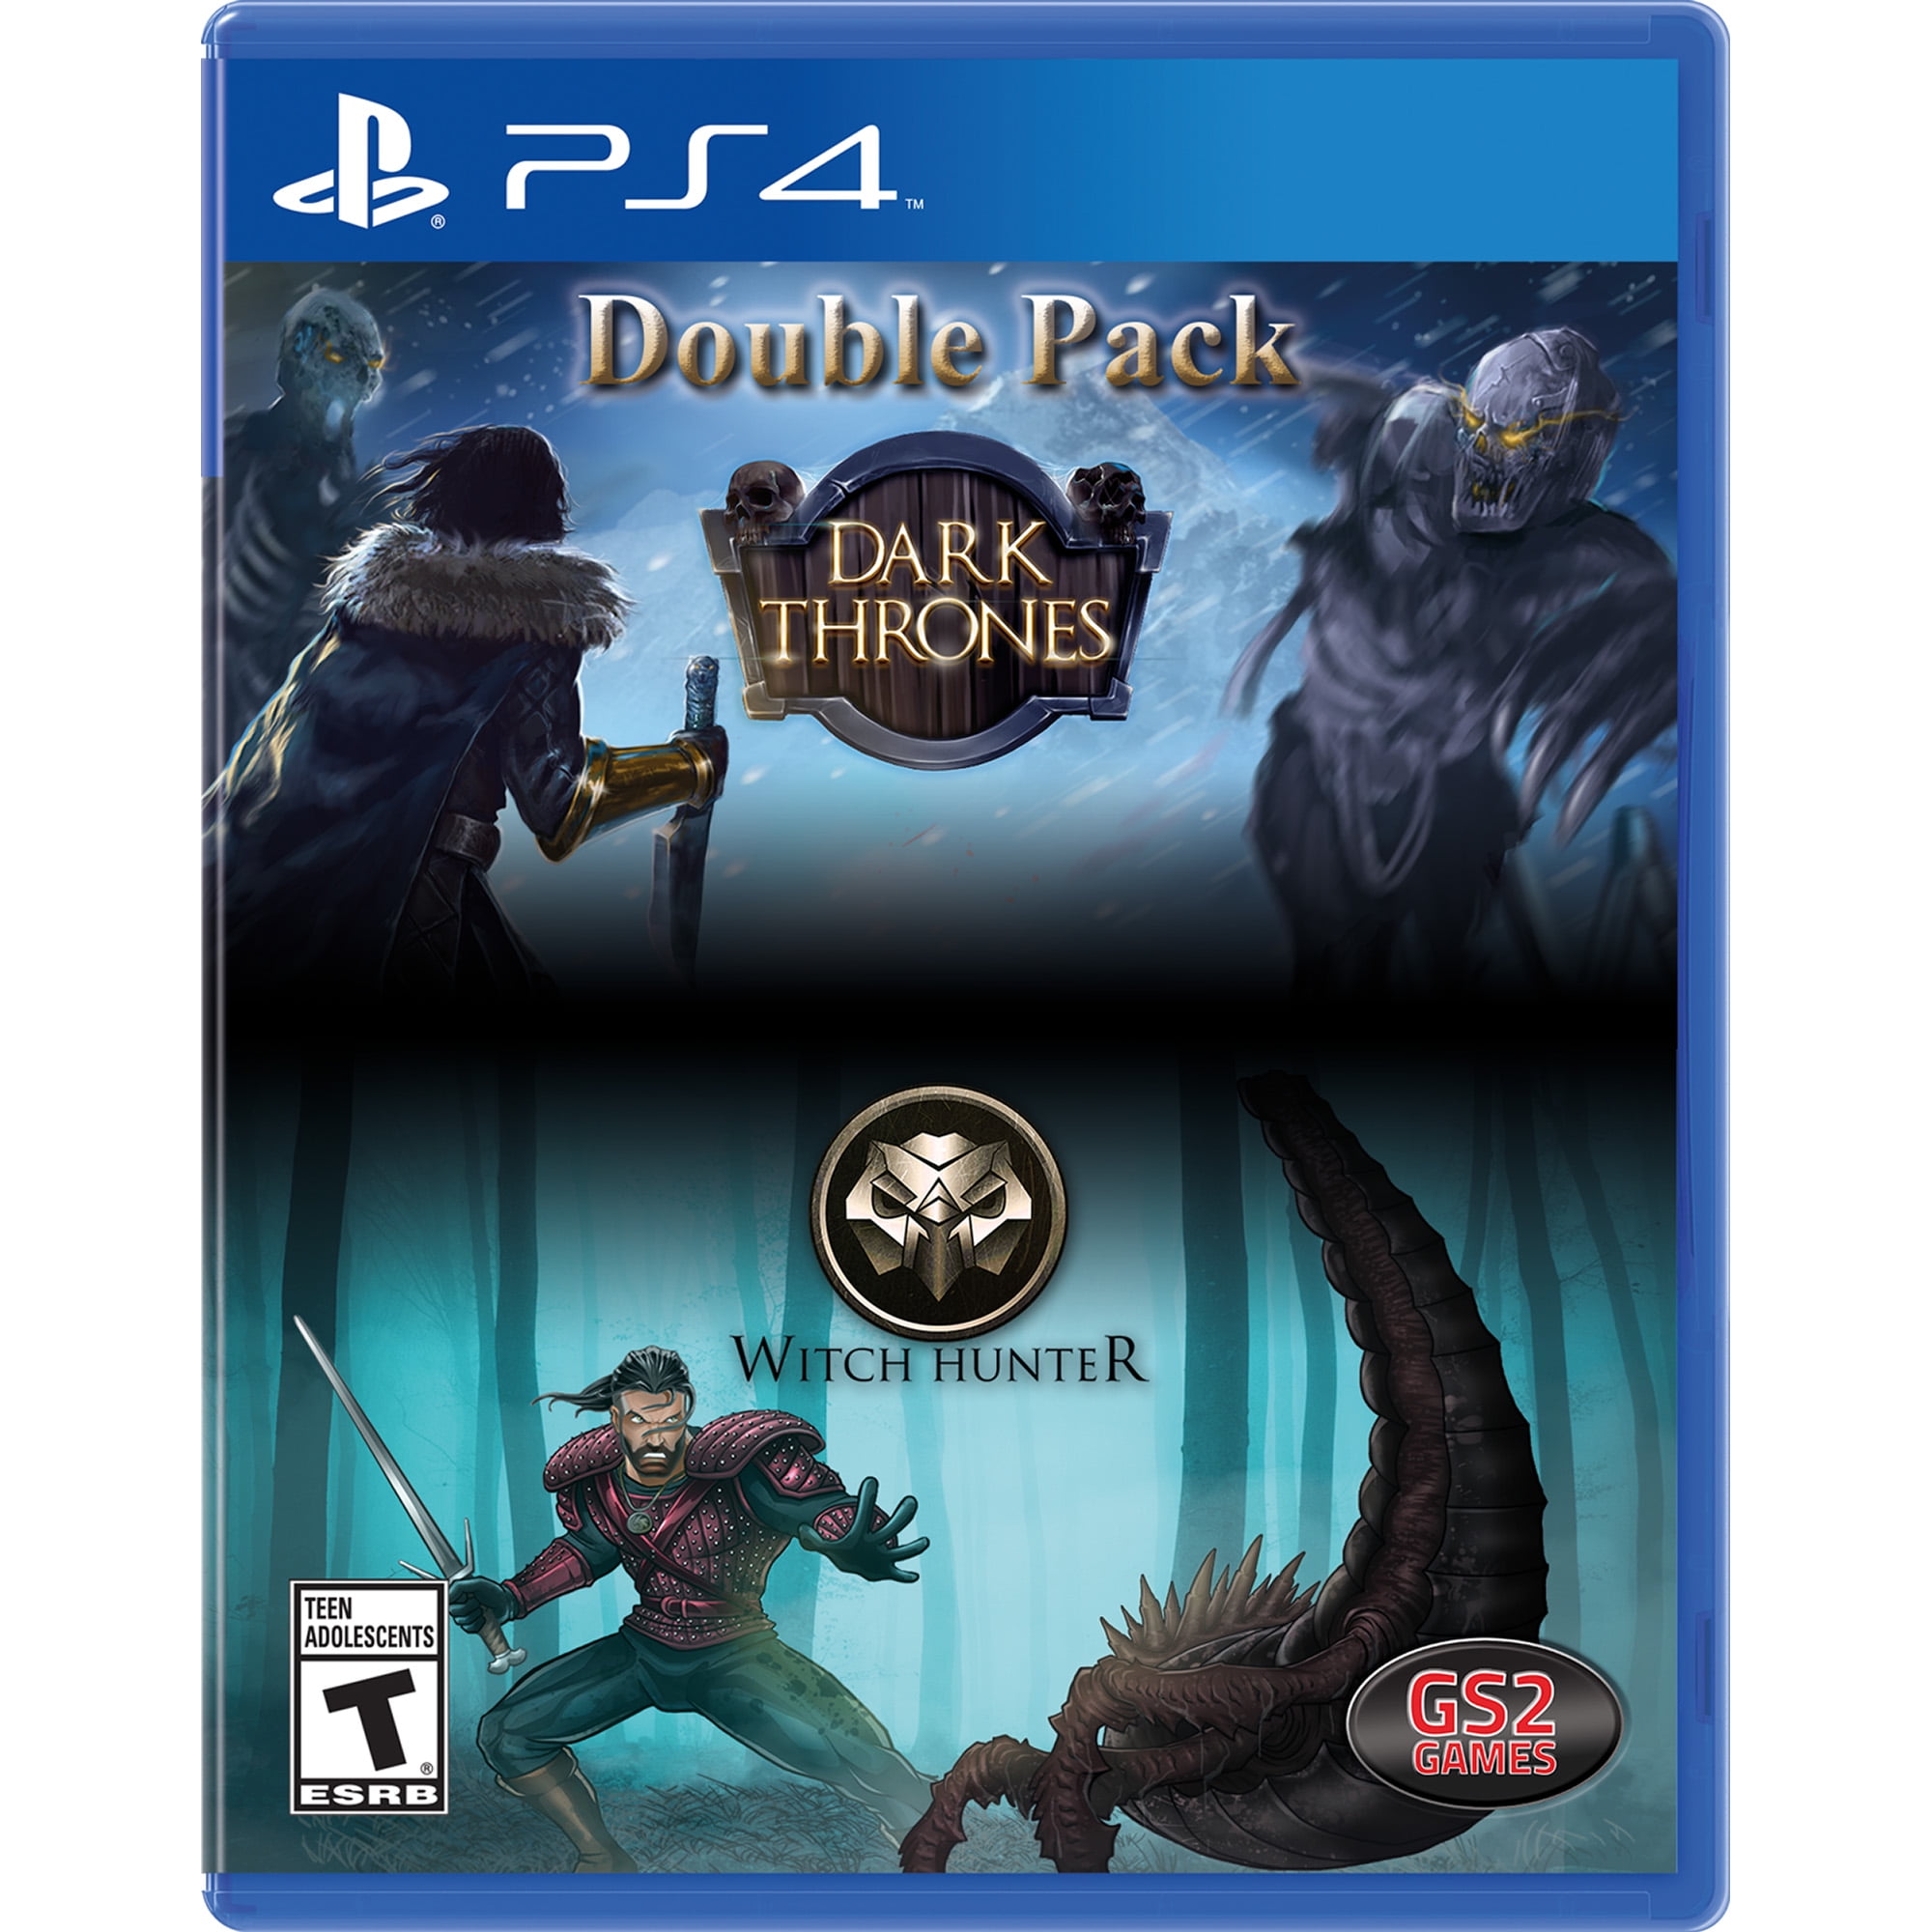 Dark Thrones + Witch Hunter Double Pack, Games, PlayStation 4, 850017102415 - Walmart.com